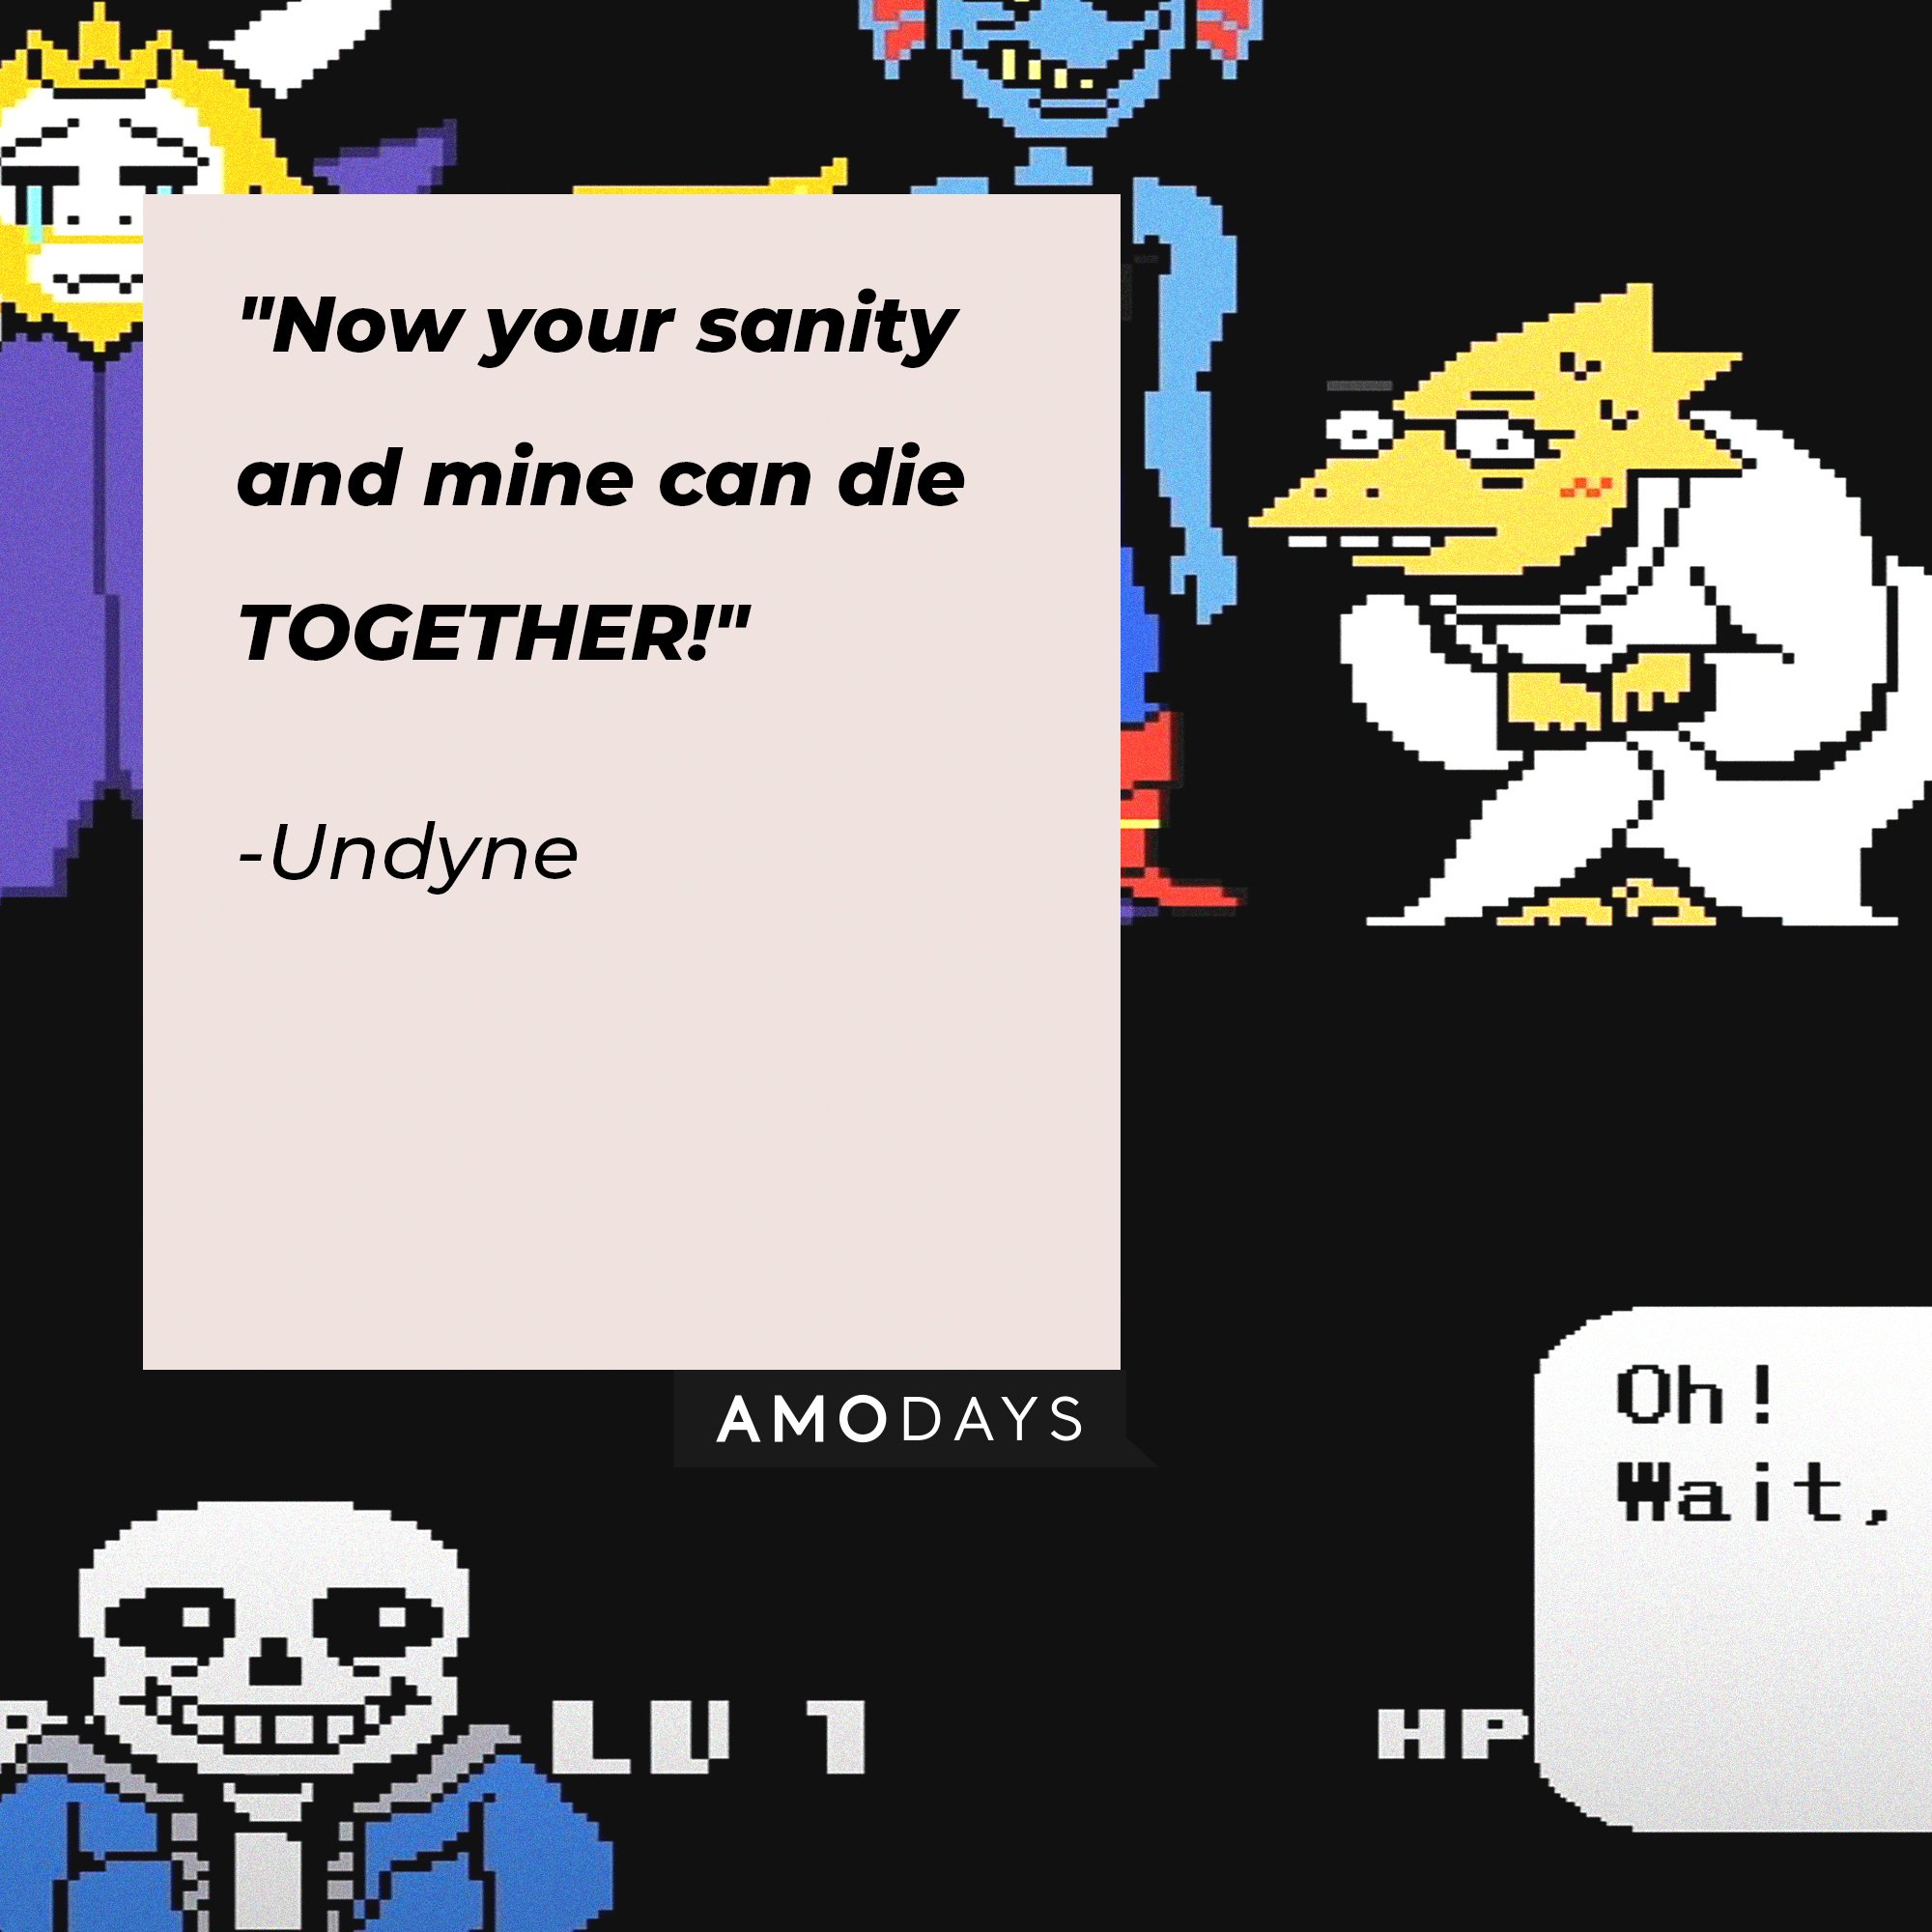 Undyne’s quote: "Now your sanity and mine can die TOGETHER!" | Image: AmoDays